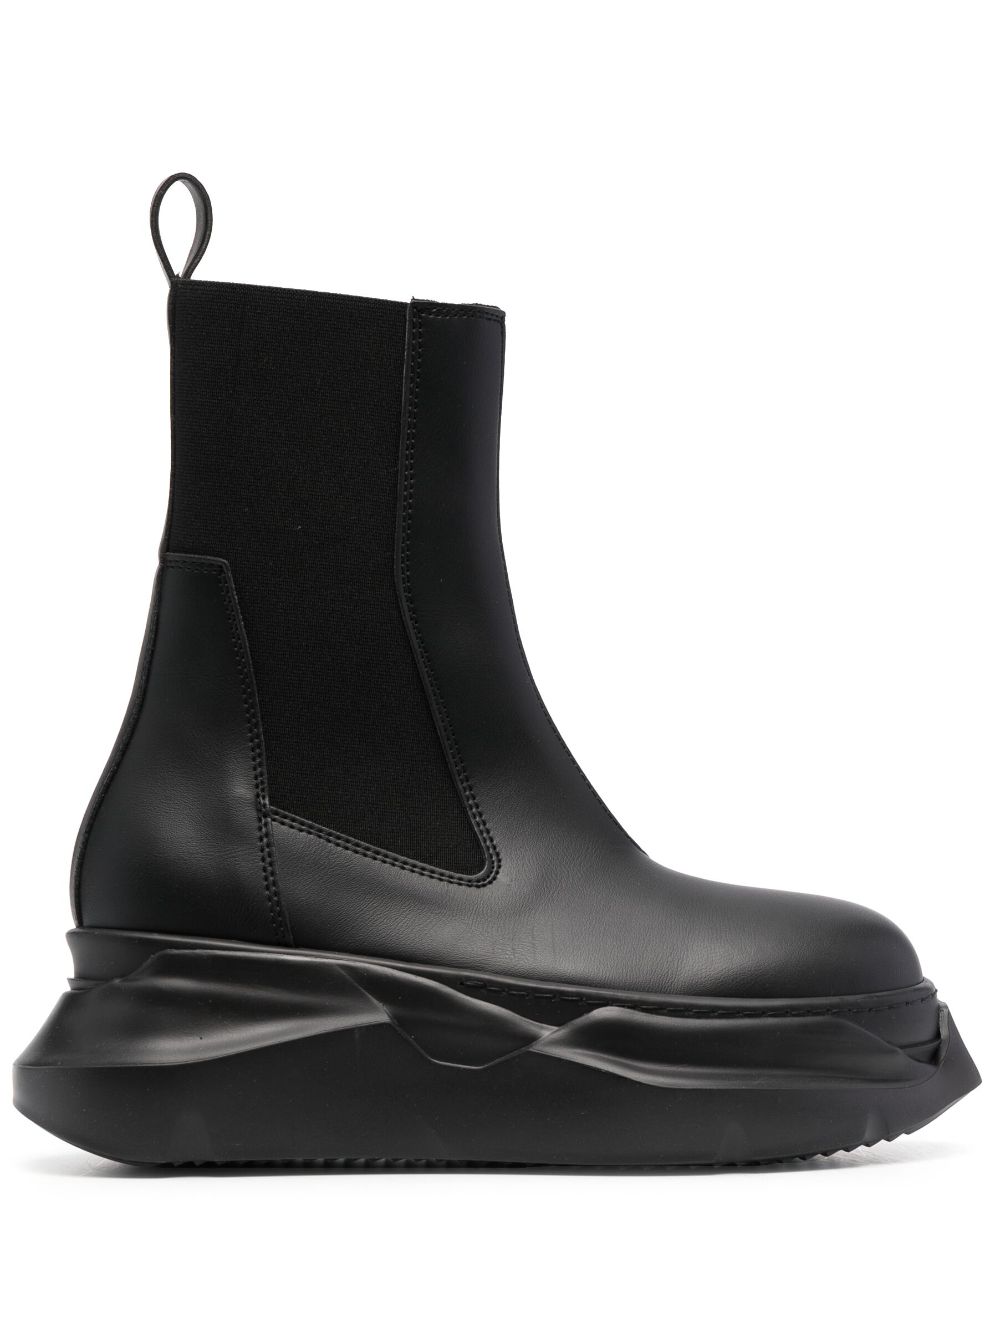 RICK OWENS DRKSHDW BEETLE LEATHER ANKLE BOOTS